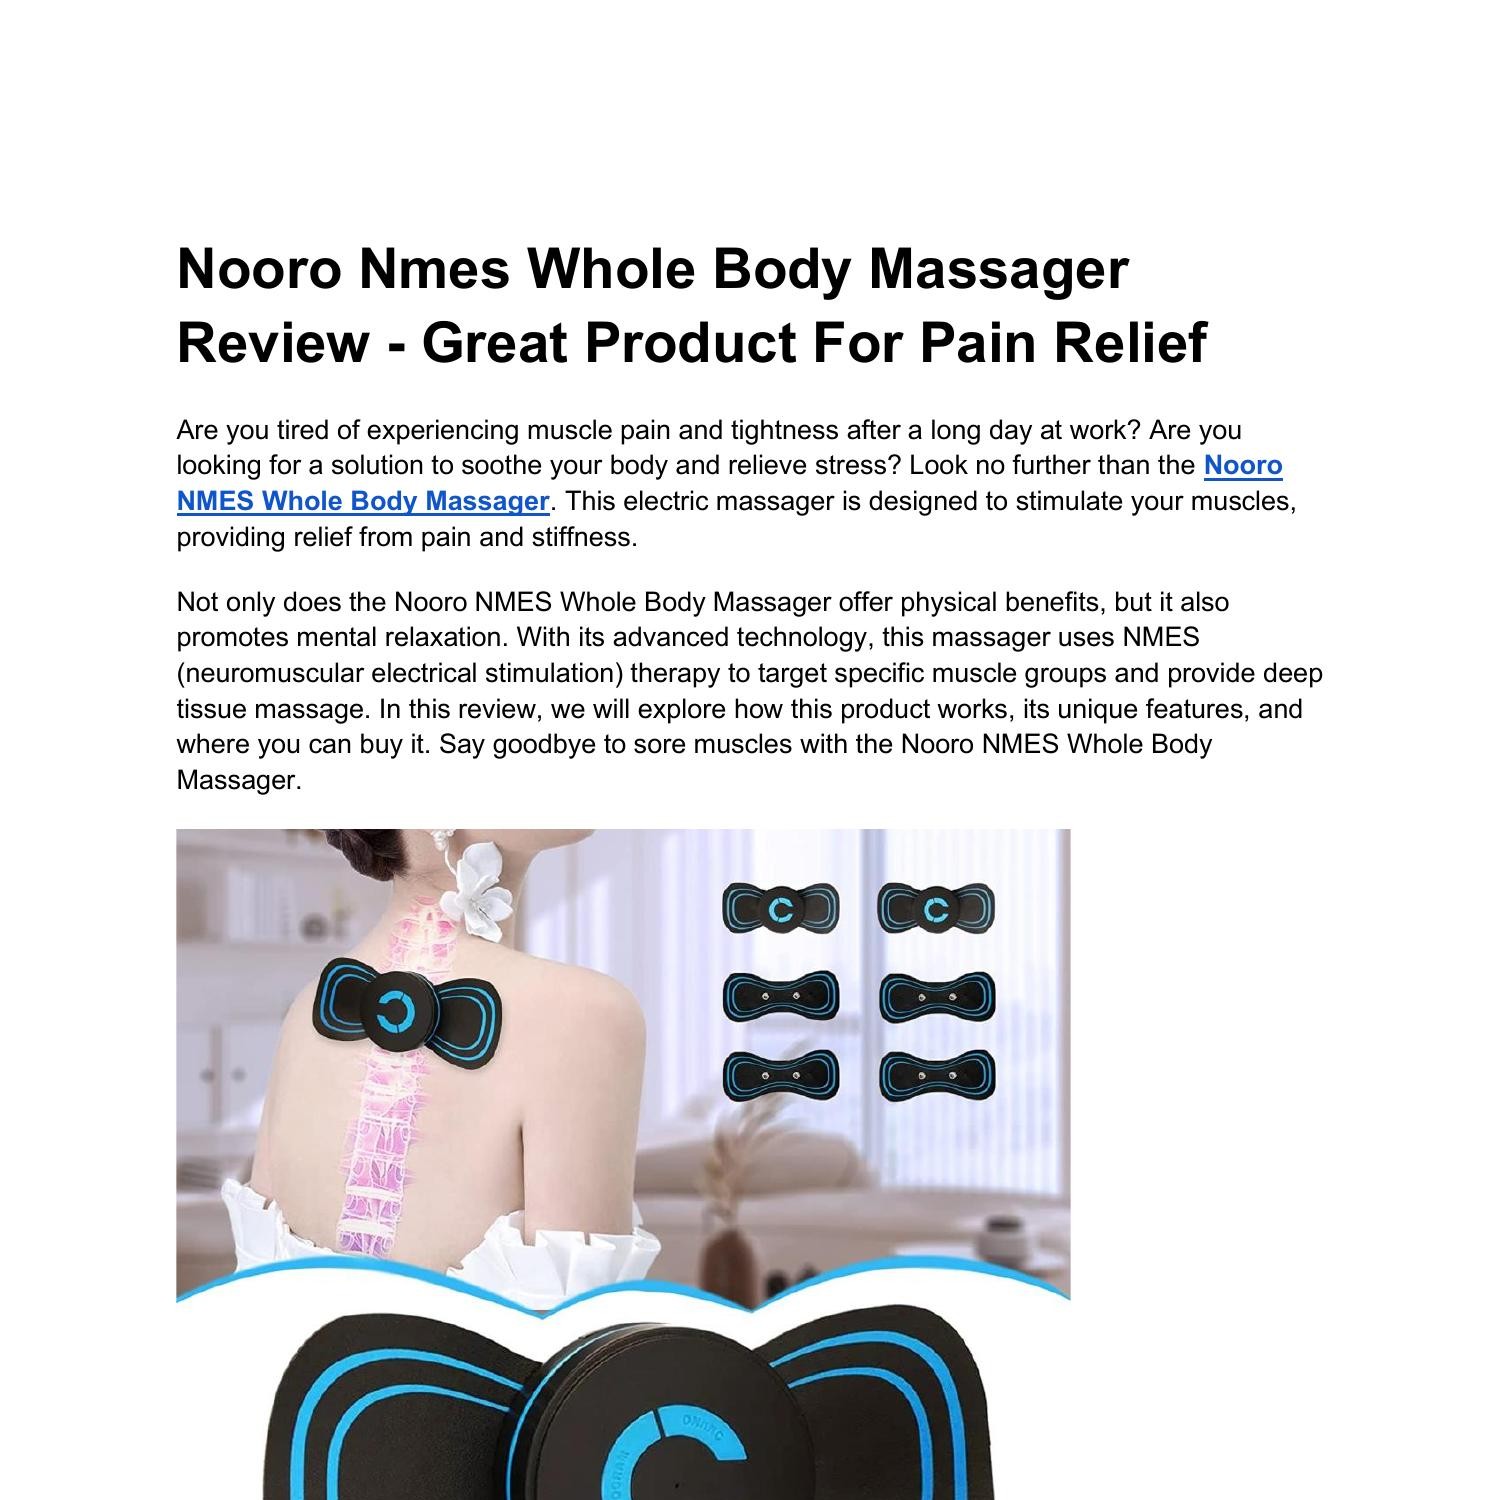 Nooro Nmes Whole Body Massager Review